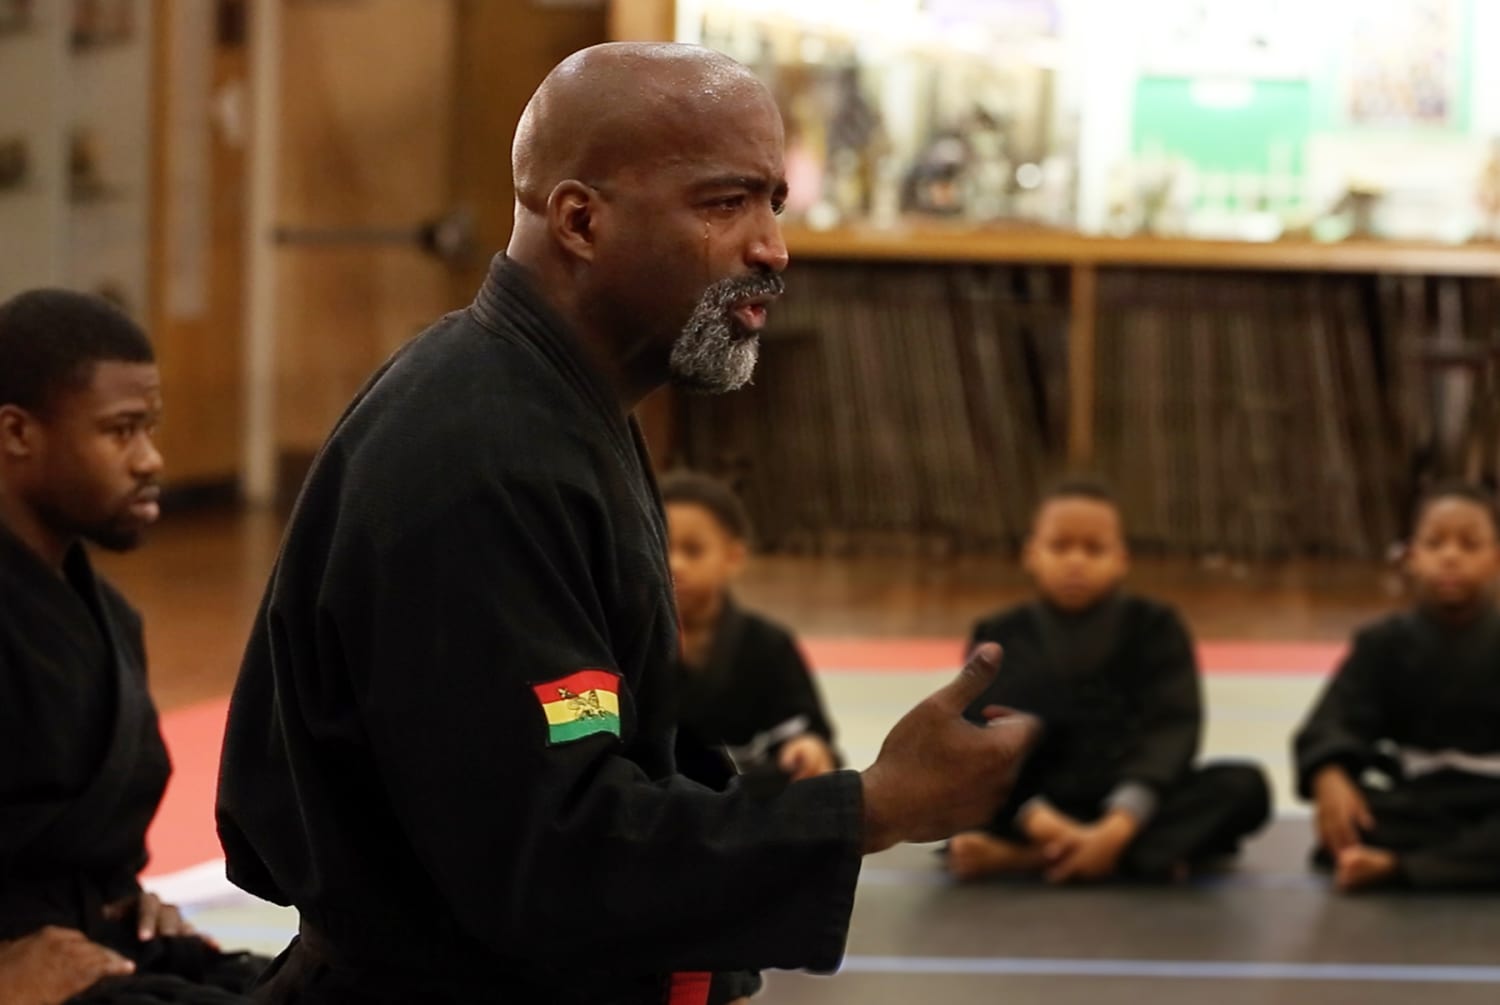 Martial arts teacher consoles tearful boy, reminds us all 'it's OK